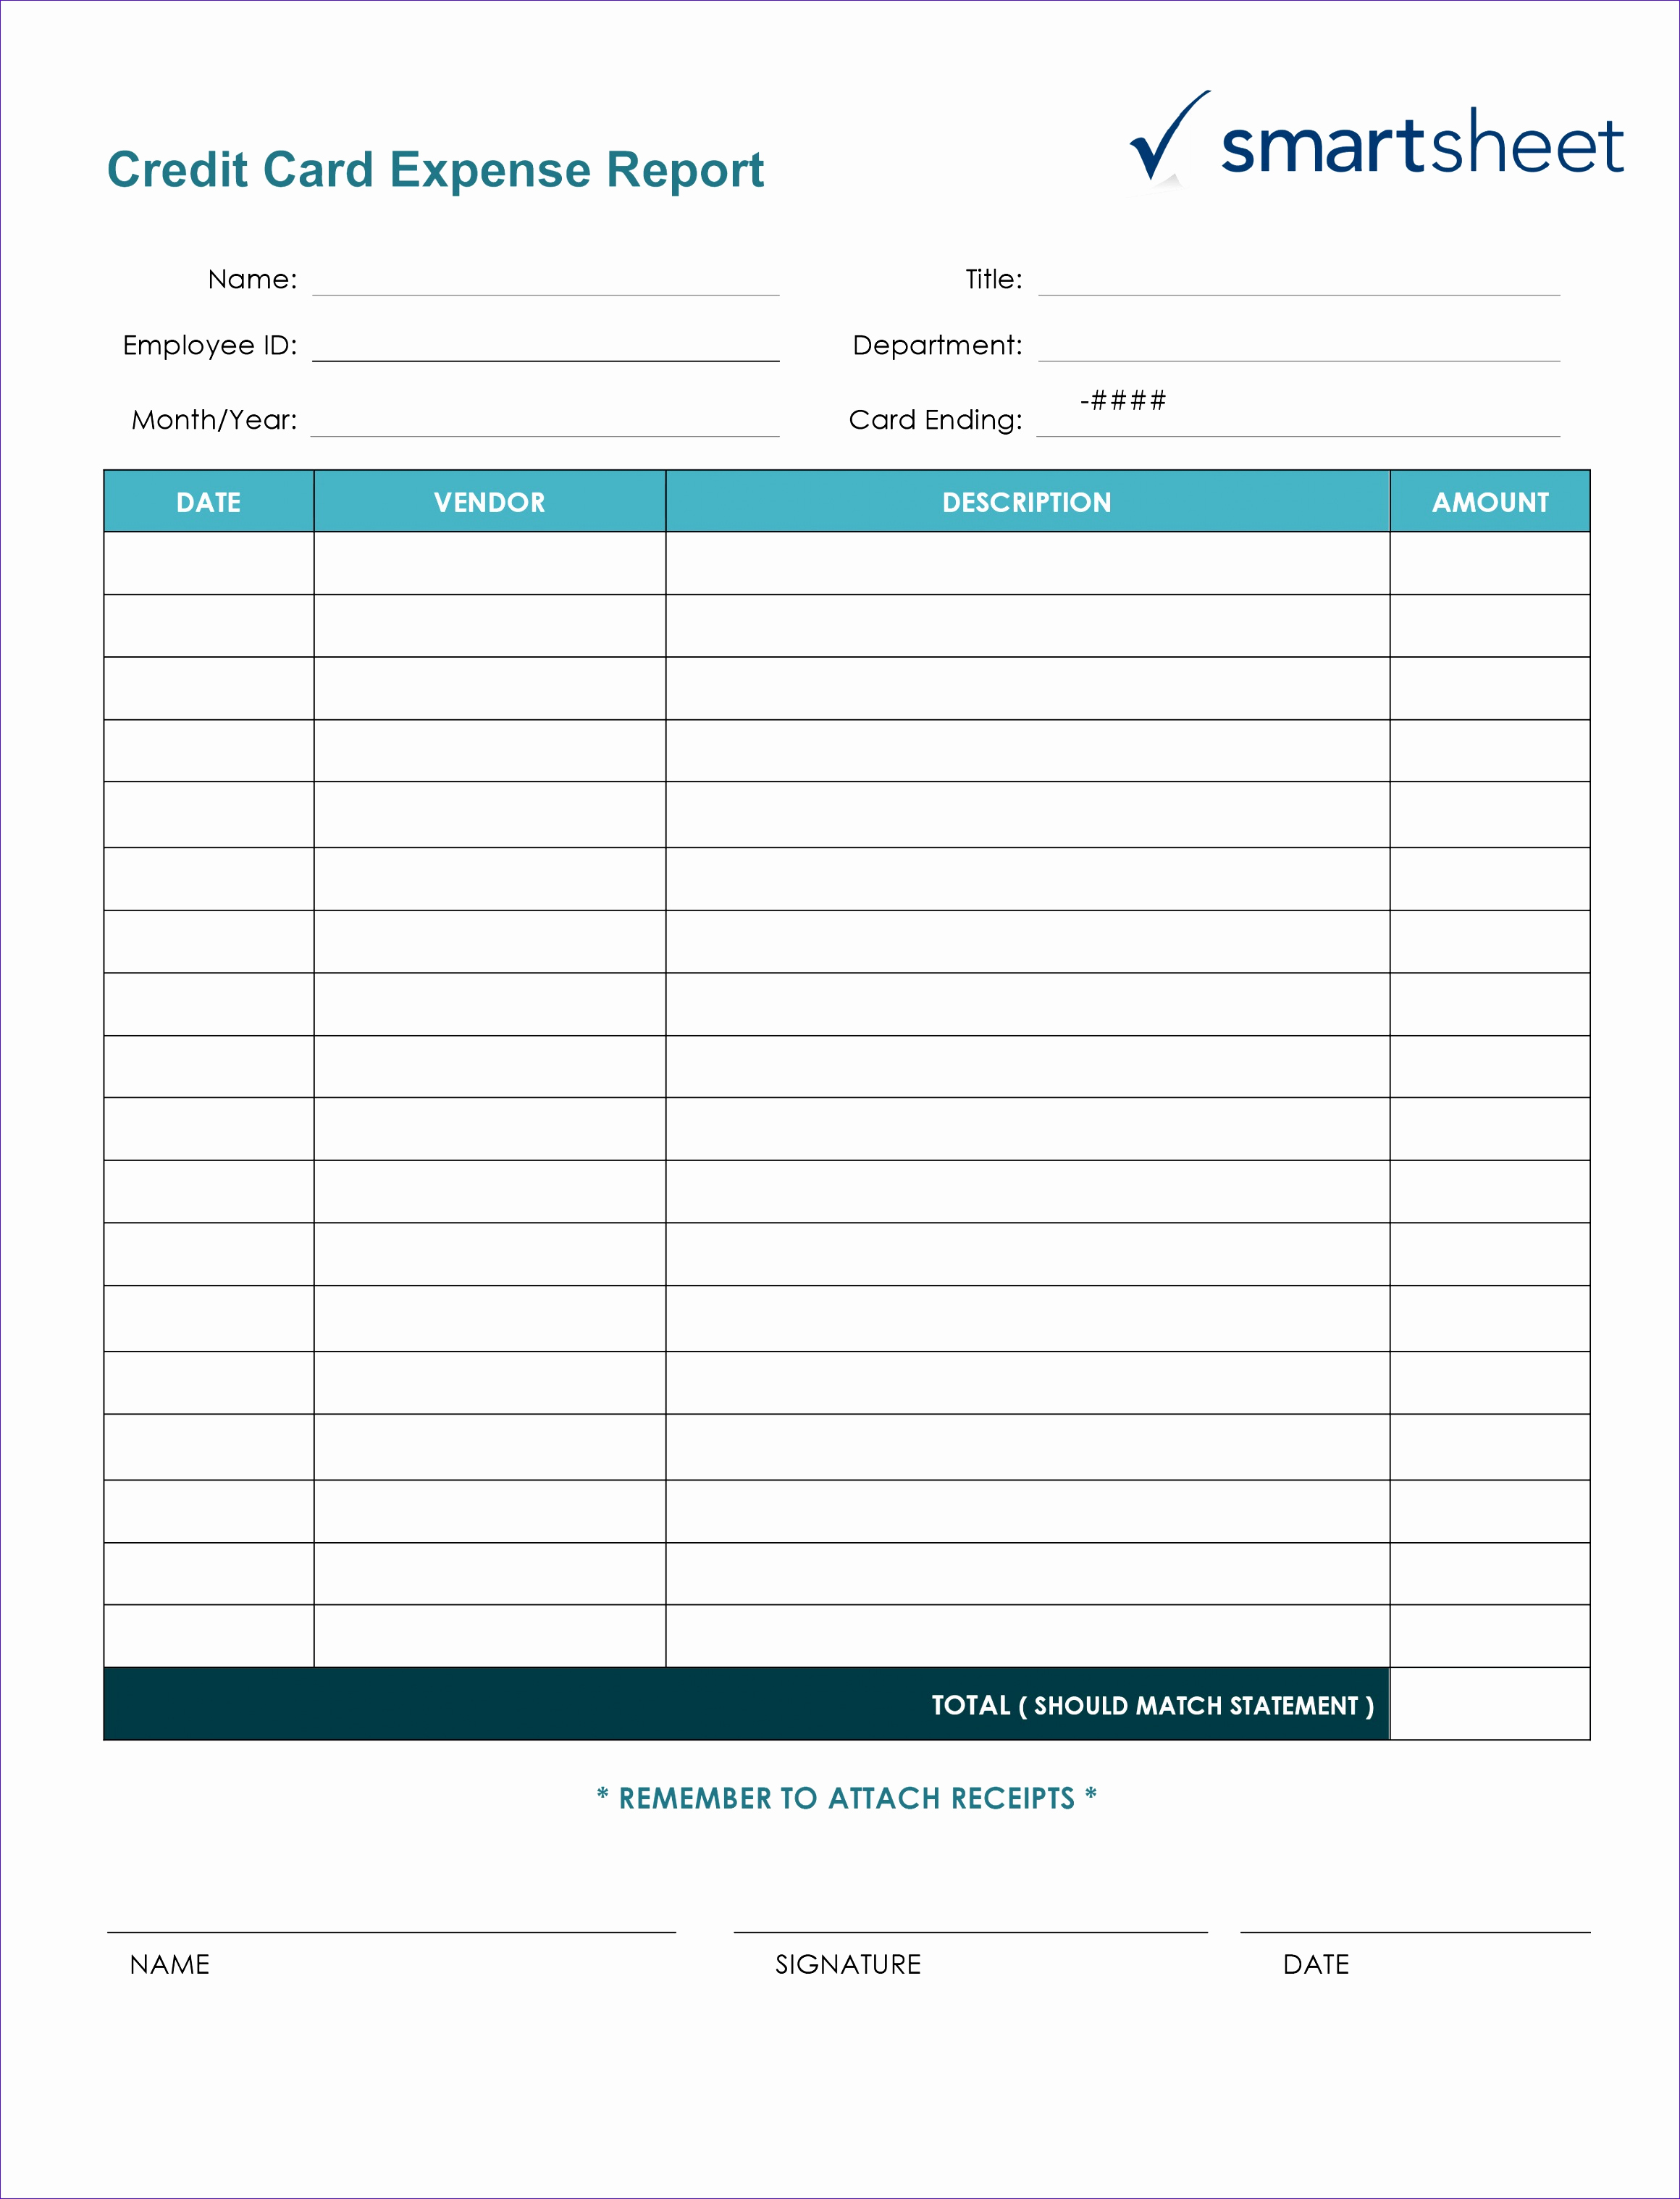 Personal Financial Statement Worksheet Lovely 10 Personal Financial Statement Template Excel